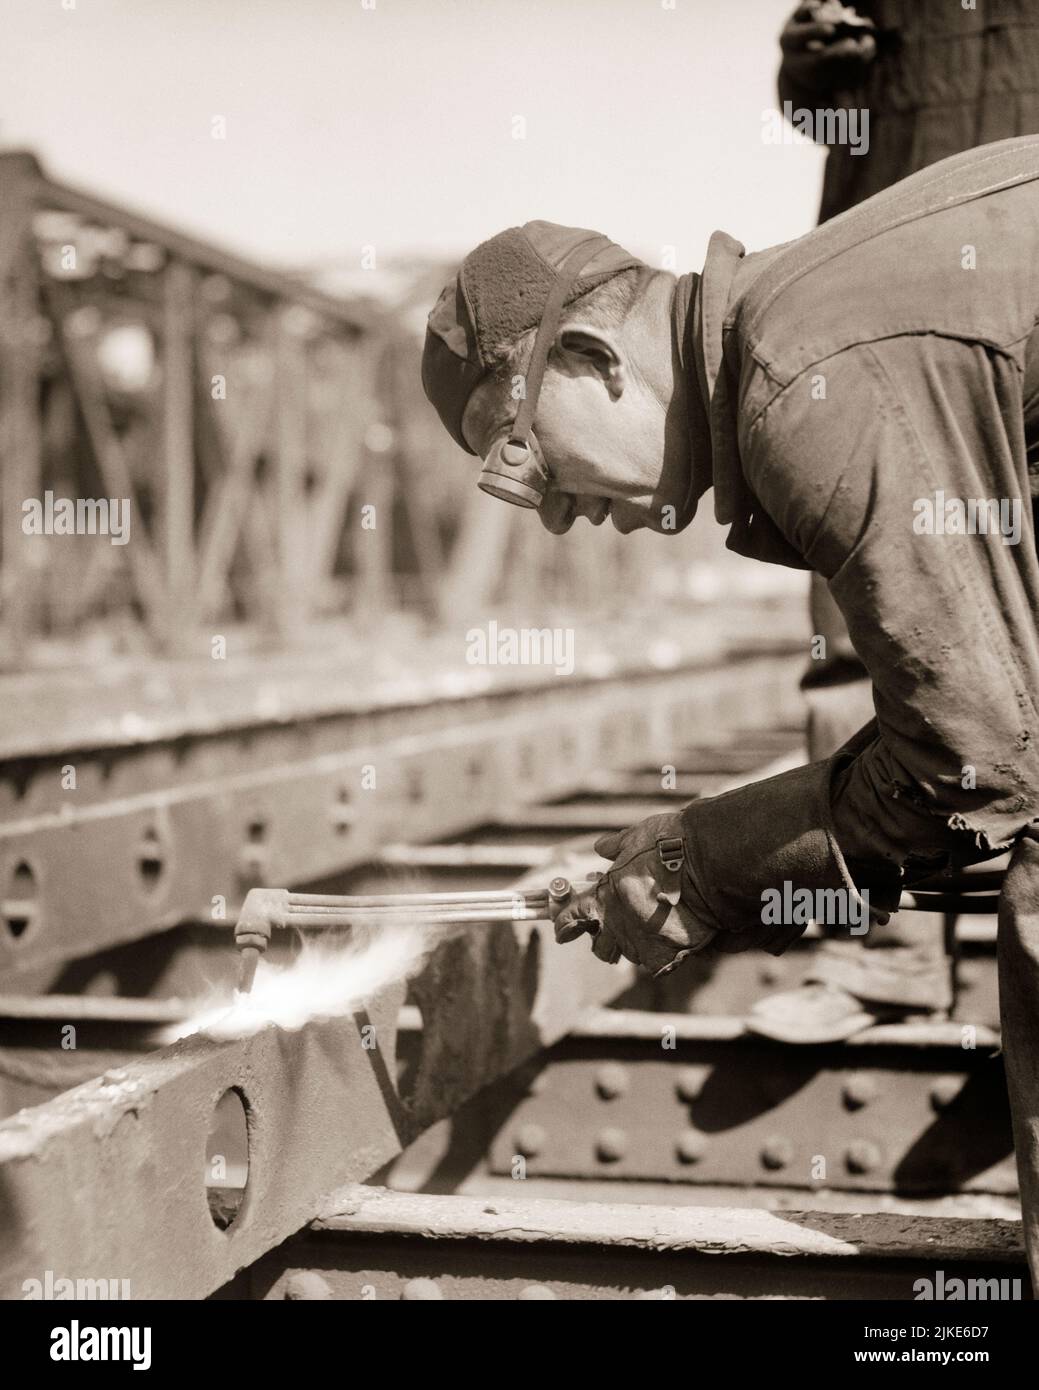 1930s MAN WEARING GOGGLES USING A BLOW TORCH CUTTING OLD GIRDERS ON A BRIDGE - i819 HAR001 HARS SKILL OCCUPATION STRUCTURE SKILLS HEAD AND SHOULDERS BUILD PROTECTION BASE CAREERS RECOVERY LABOR BETTER EMPLOYMENT OCCUPATIONS USING ERECT GIRDERS ERECTING INFRASTRUCTURE EMPLOYEE FACILITIES CORE MID-ADULT MID-ADULT MAN SYSTEMS BLACK AND WHITE CAUCASIAN ETHNICITY ECONOMY HAR001 LABORING OLD FASHIONED Stock Photo